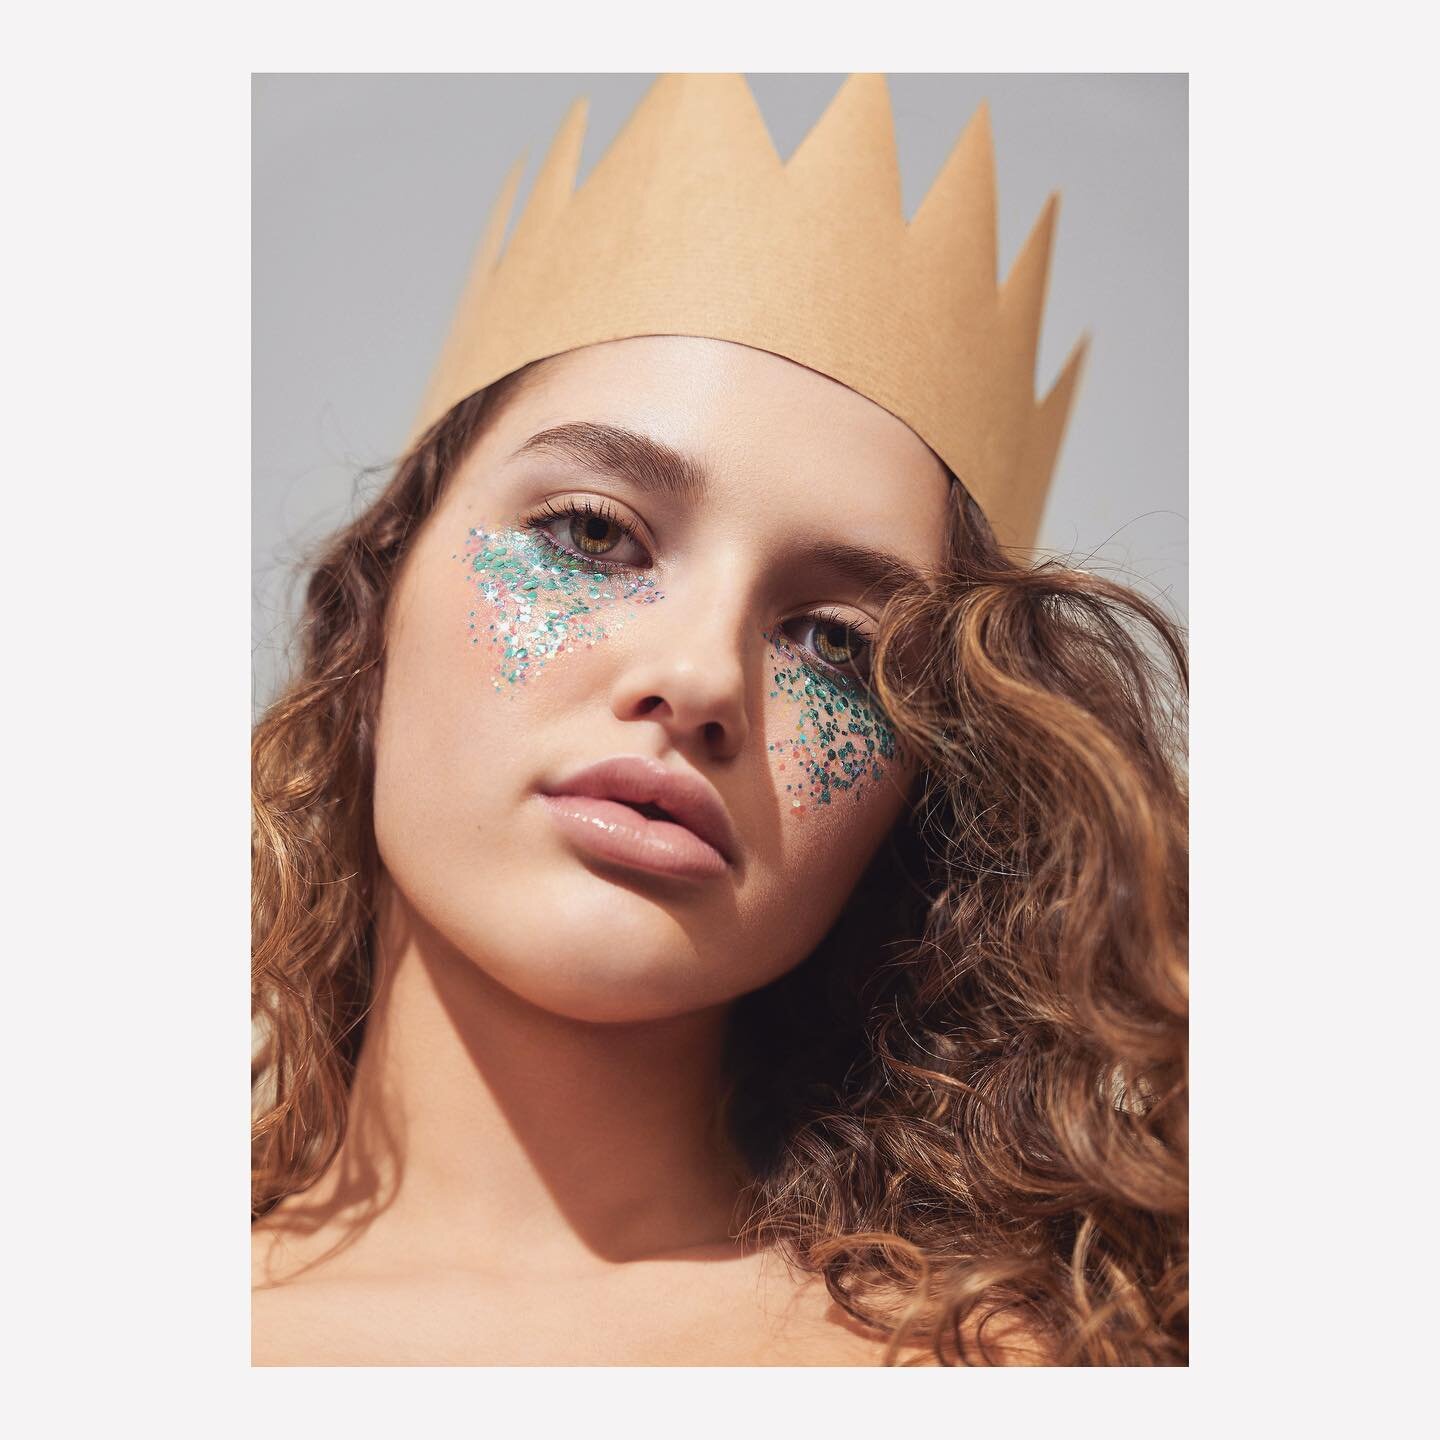 Glitter Queen 👑 
New tutorial just in time for festive season by Wendy Rowe ✨ 
.
.
Photo by Me
Make Up: Wendy Rowe
Model: Cassie Green
Retouch: Closer Post
Agent: Tess Model Management
.
.
#leicasl2 #beauty #model #glitterqueen #wendyrowe #beautysho